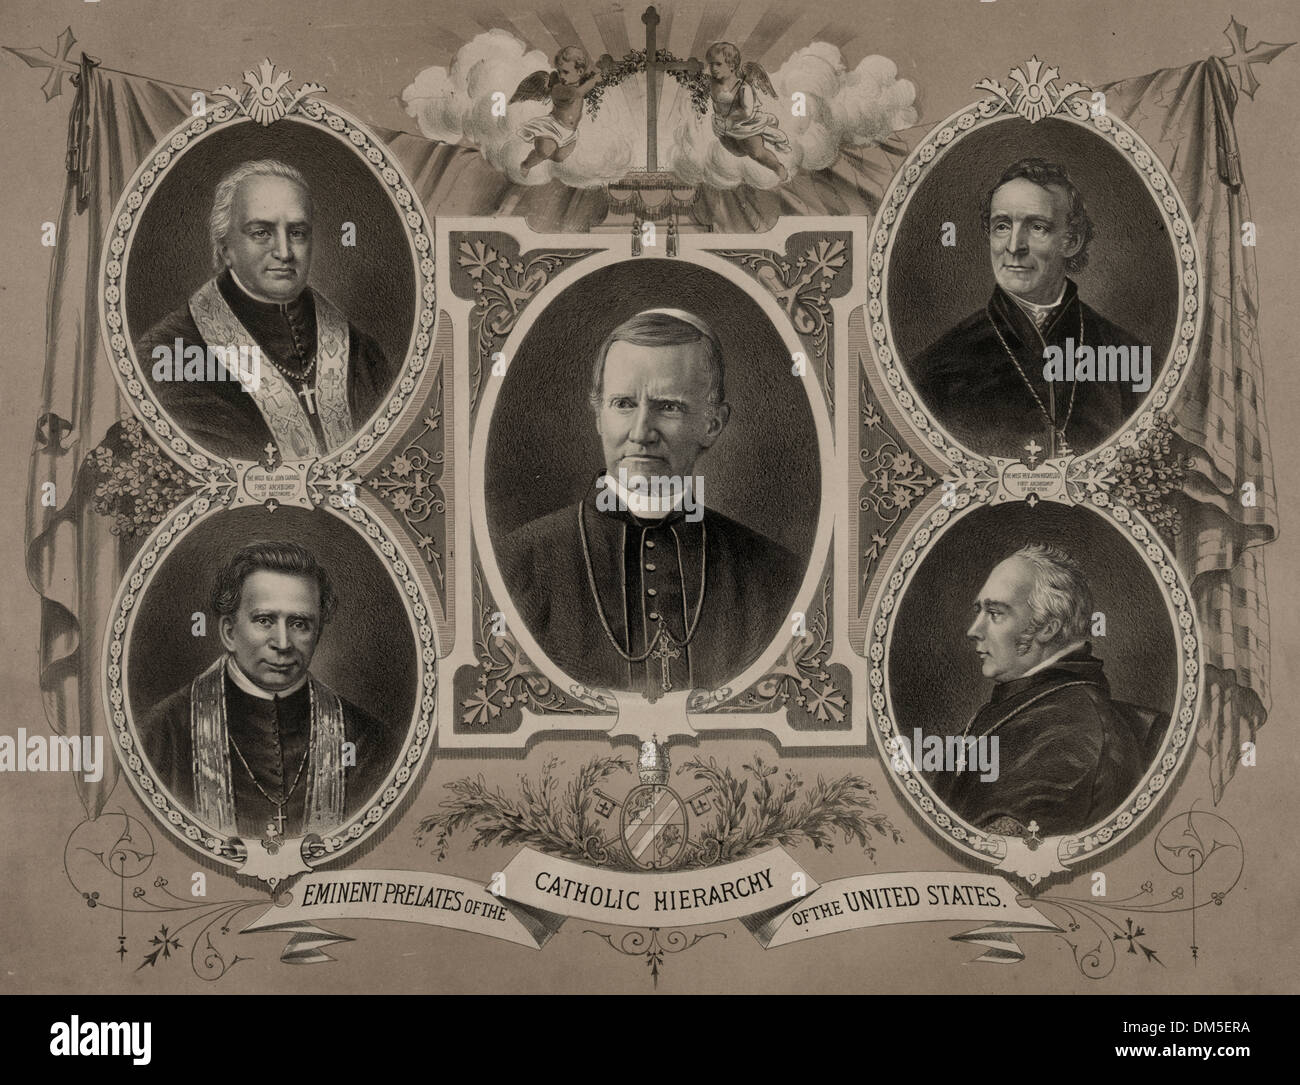 Eminent prelates of the Catholic hierarchy of the United States, 1877 Stock Photo